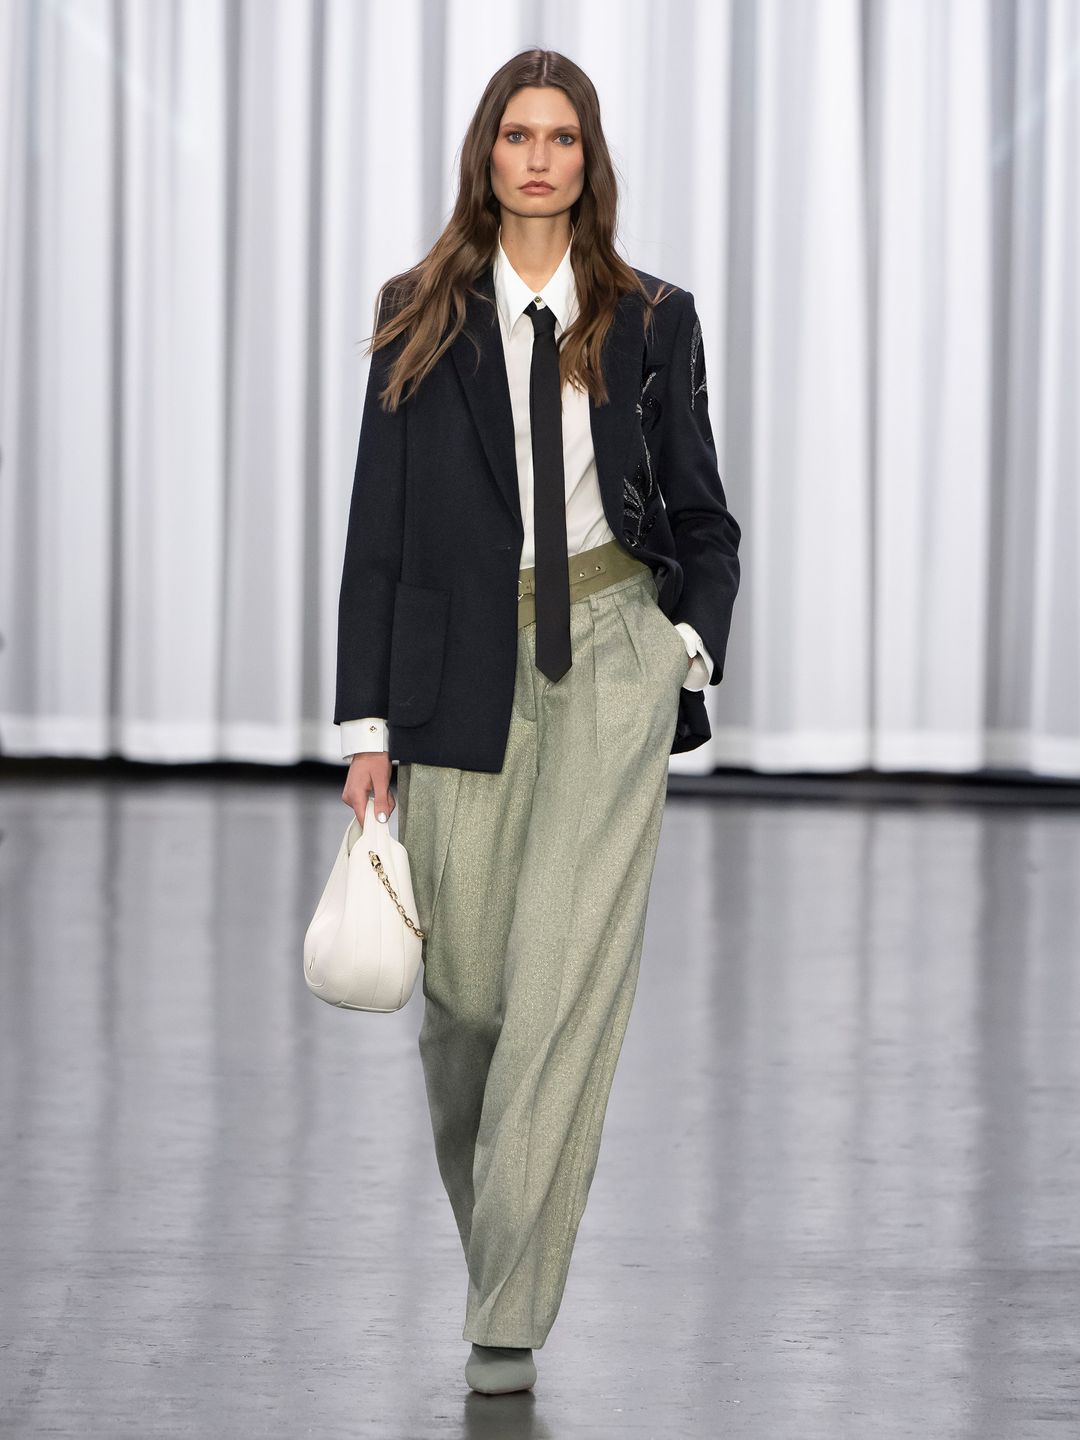 Marc Cain model wears sage green pants, a white shirt tie and blazer look